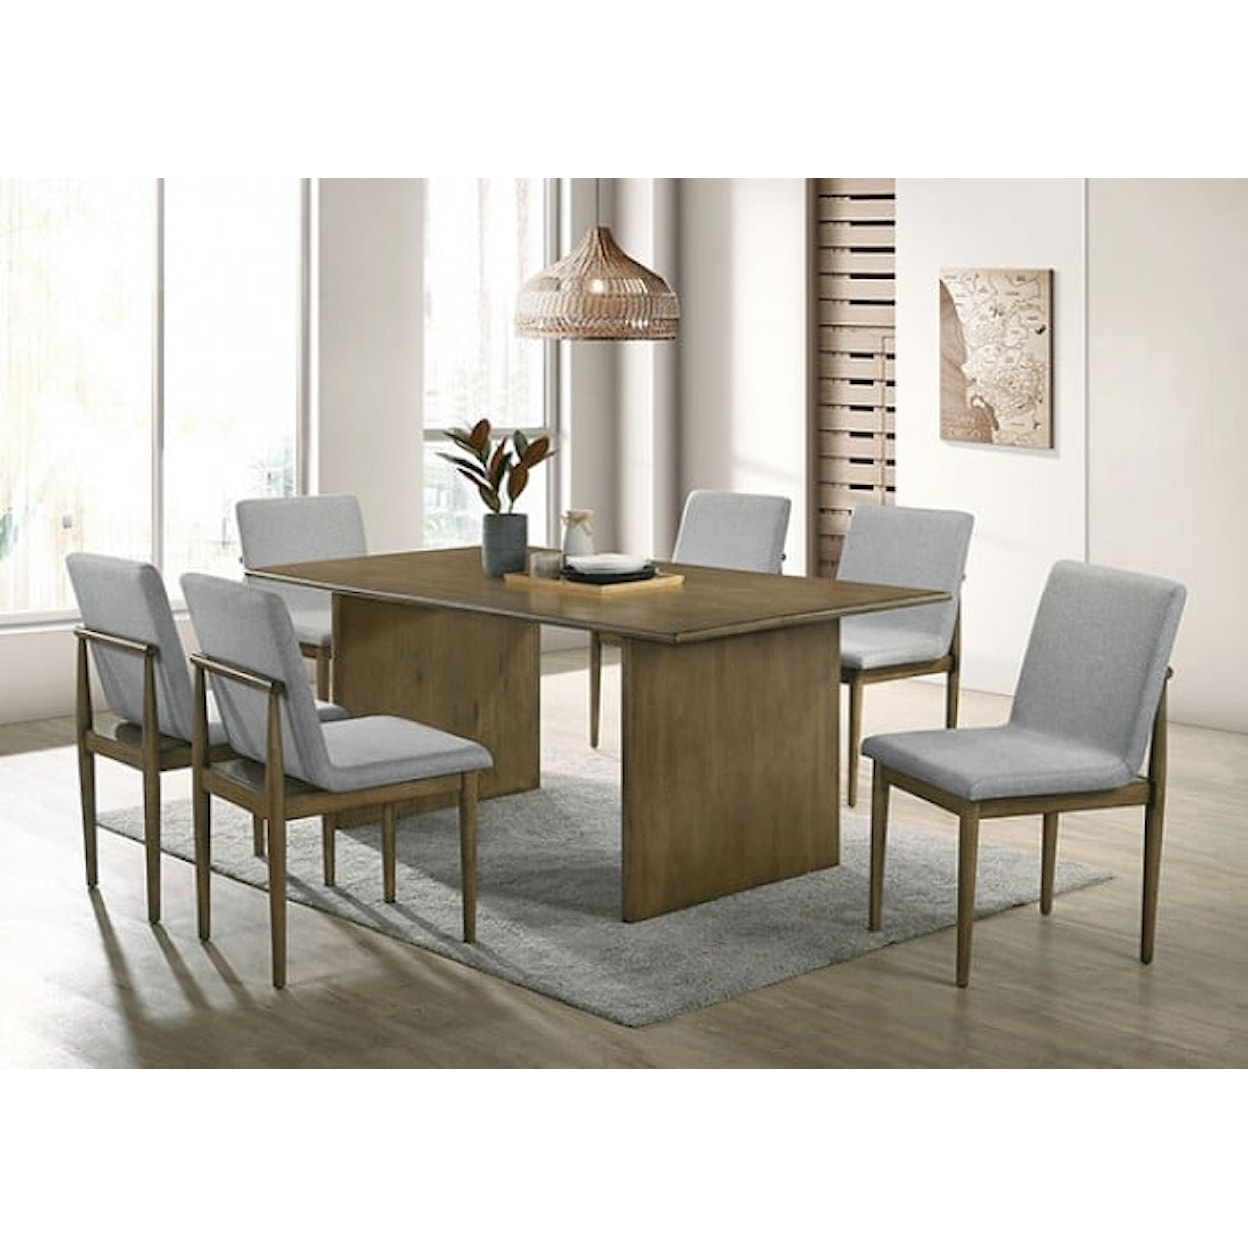 Furniture of America ST GALLEN Dining Table